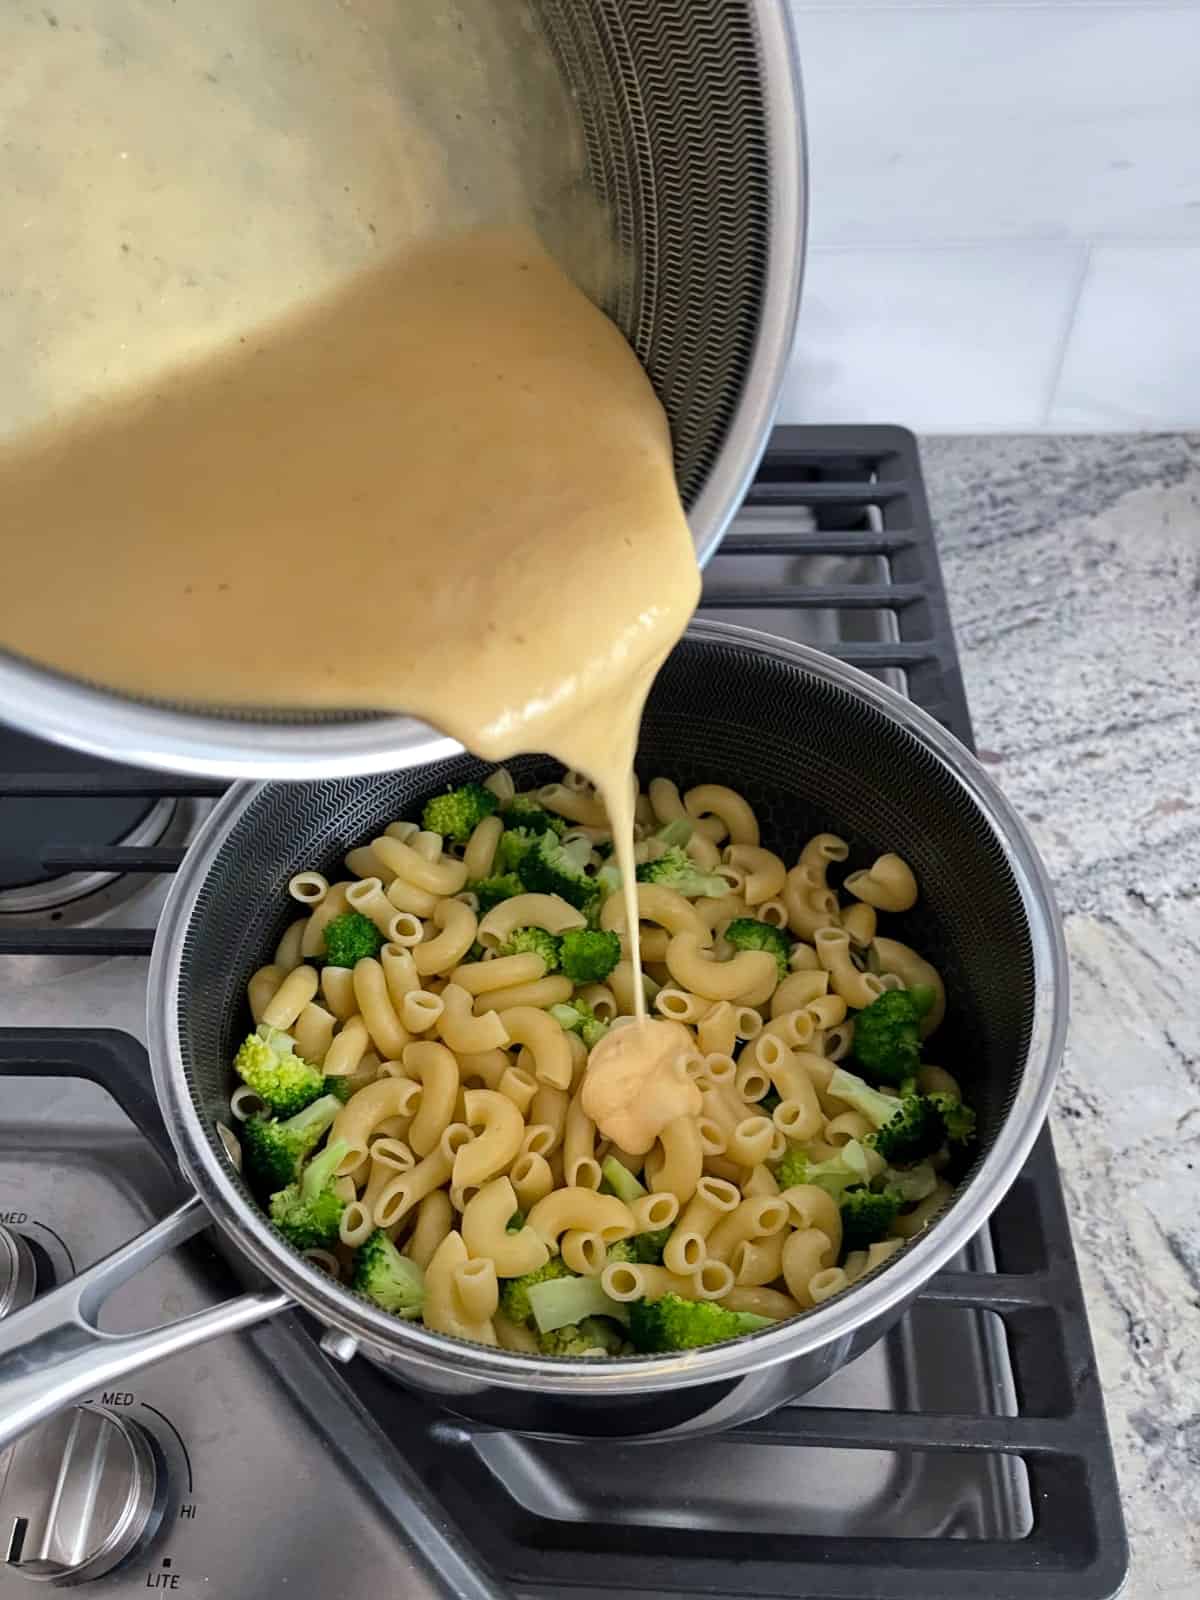 Pouring cheese sauce over cooked macaroni and broccoli in saucepan.